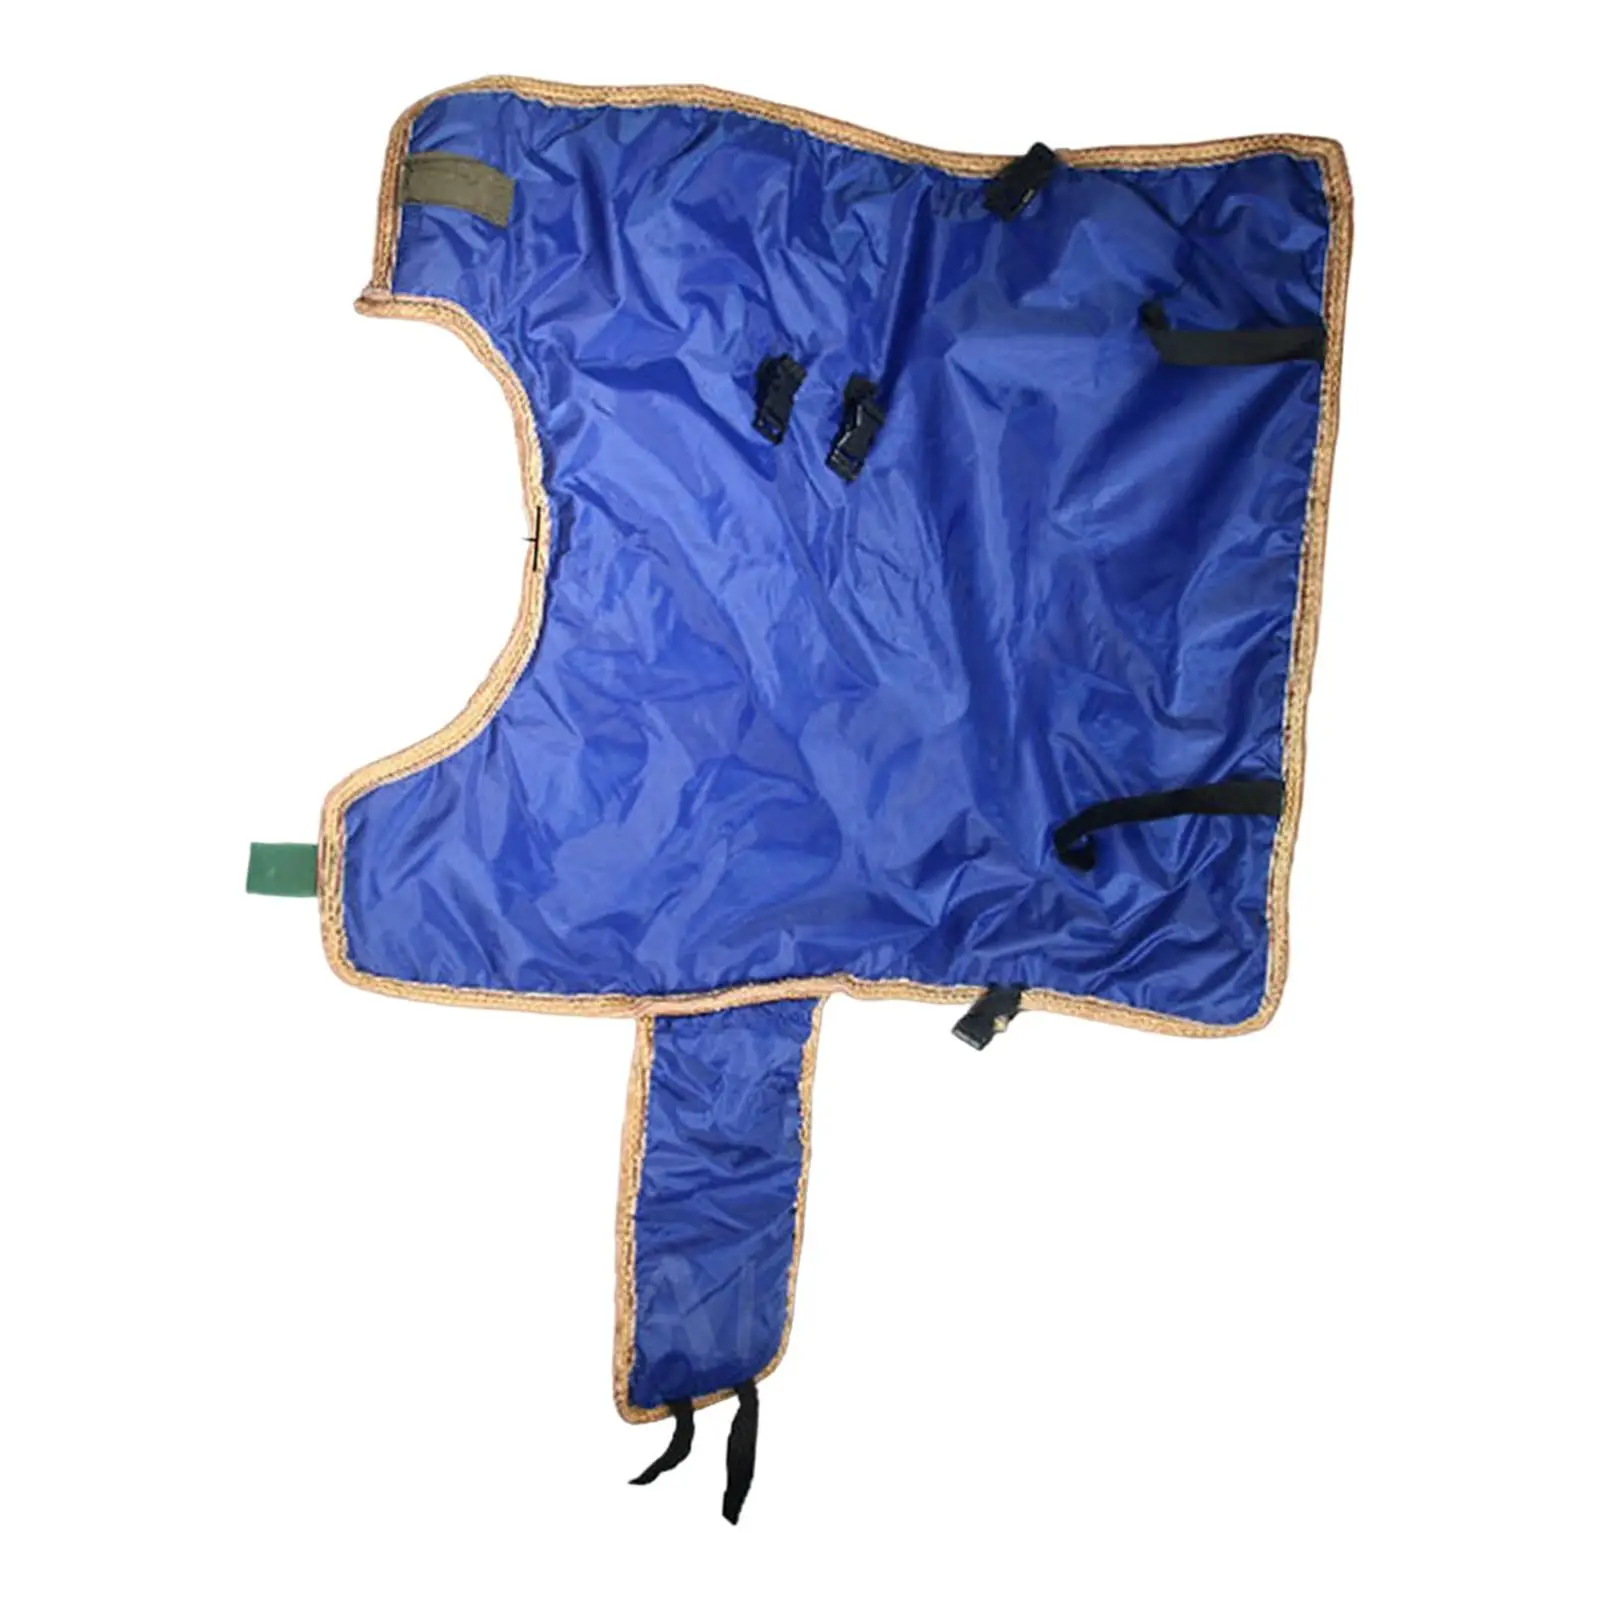 Calf Warm Clothes Cattle Clothing Coat Belly Protection Cold Weather Oxford Fabric Waterproof Keep Cow Warm Jacket